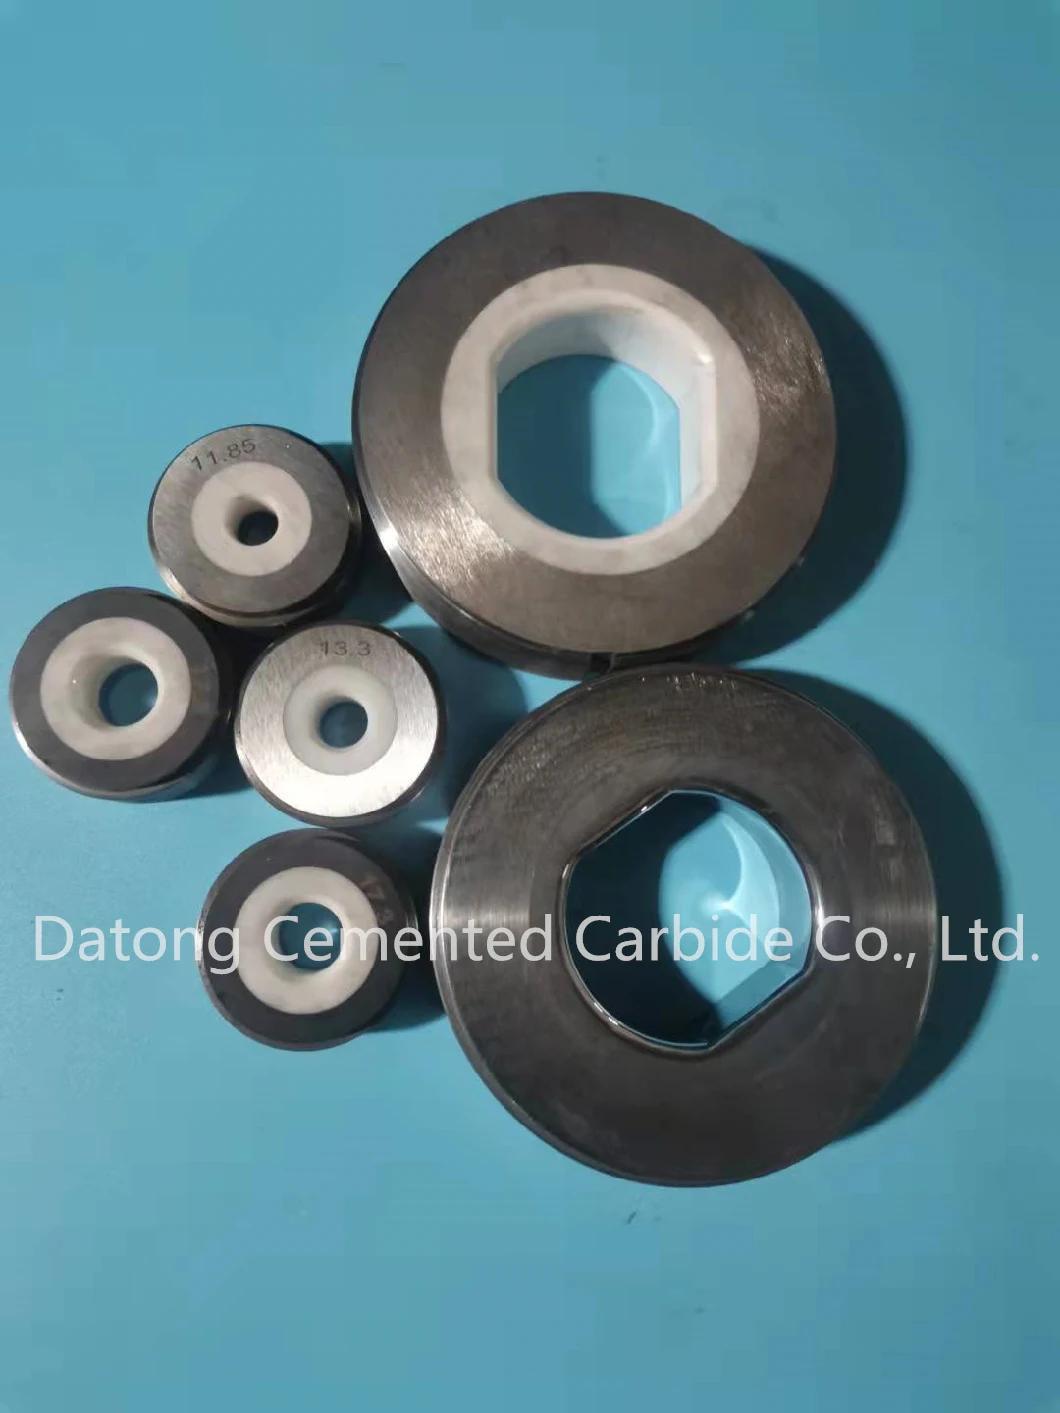 Custom-Made Production of Various Diamonds, Ceramics, Tungsten Steel, Wear-Resistant Parts, Tools and Mold Accessories.